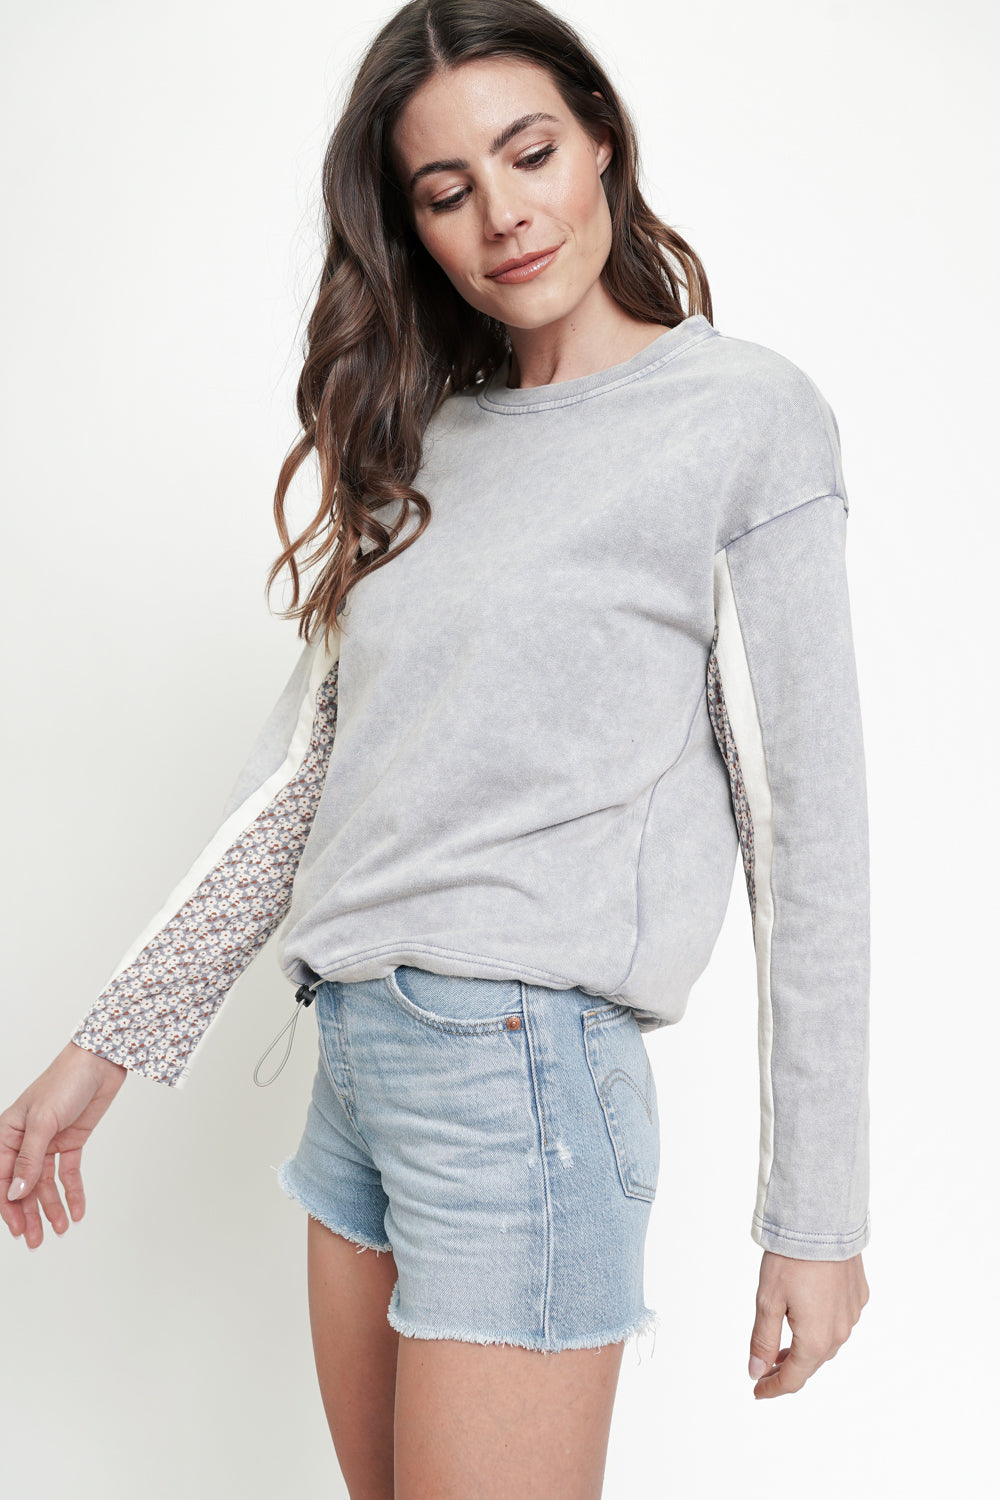 Grey with Patterned Sleeves